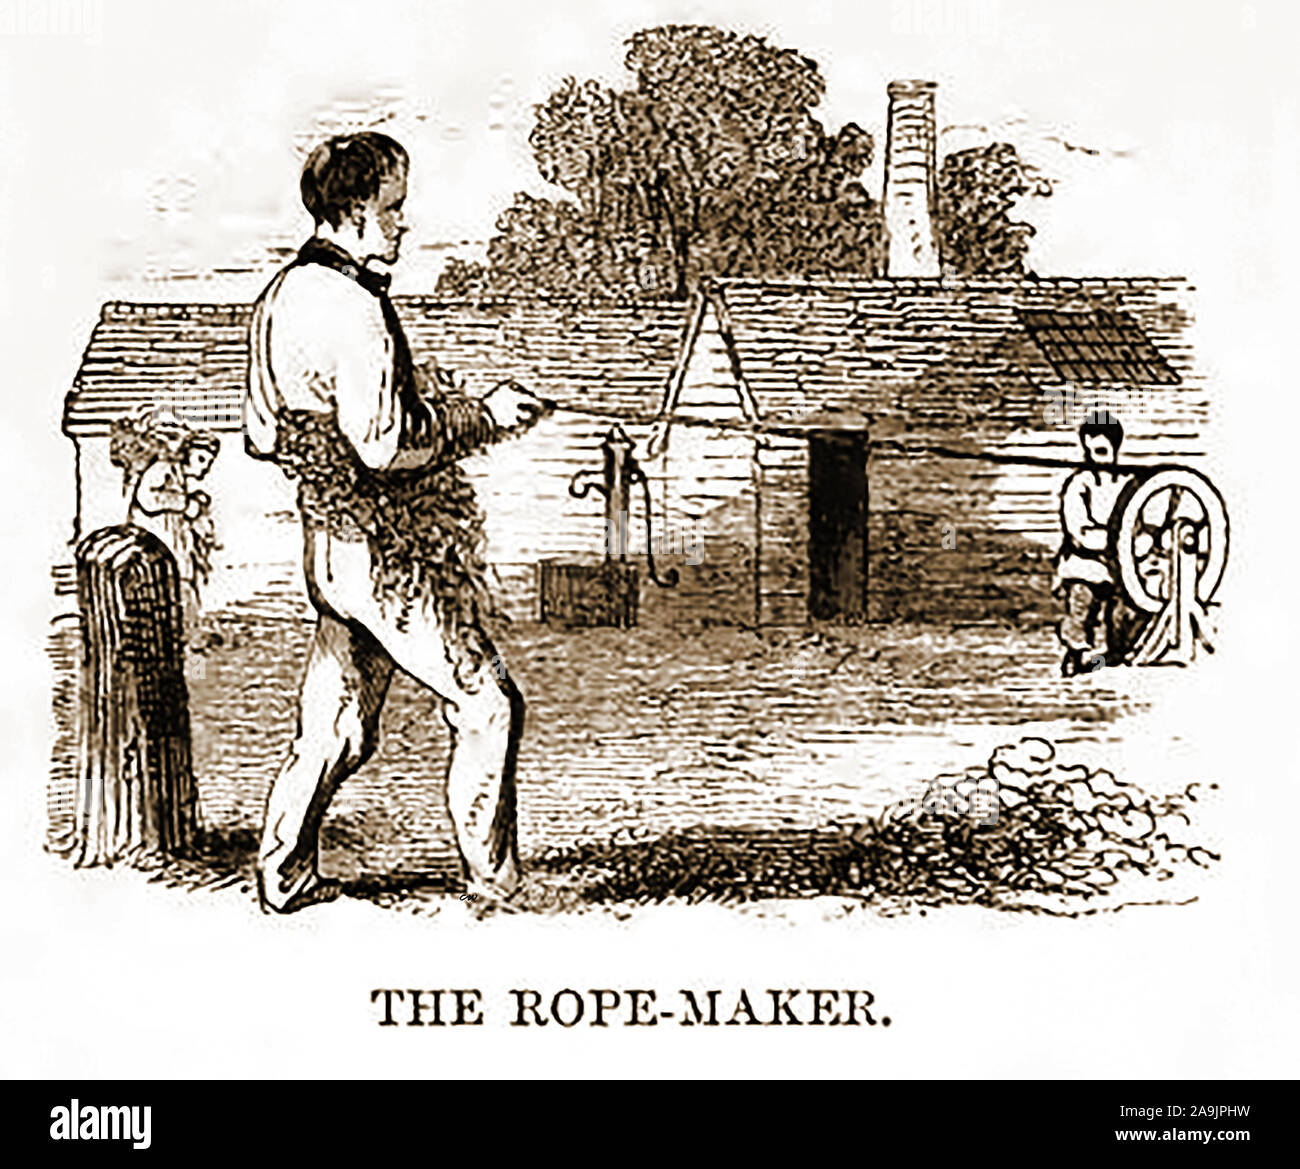 An early engraving of rope making by hand in an 18th century